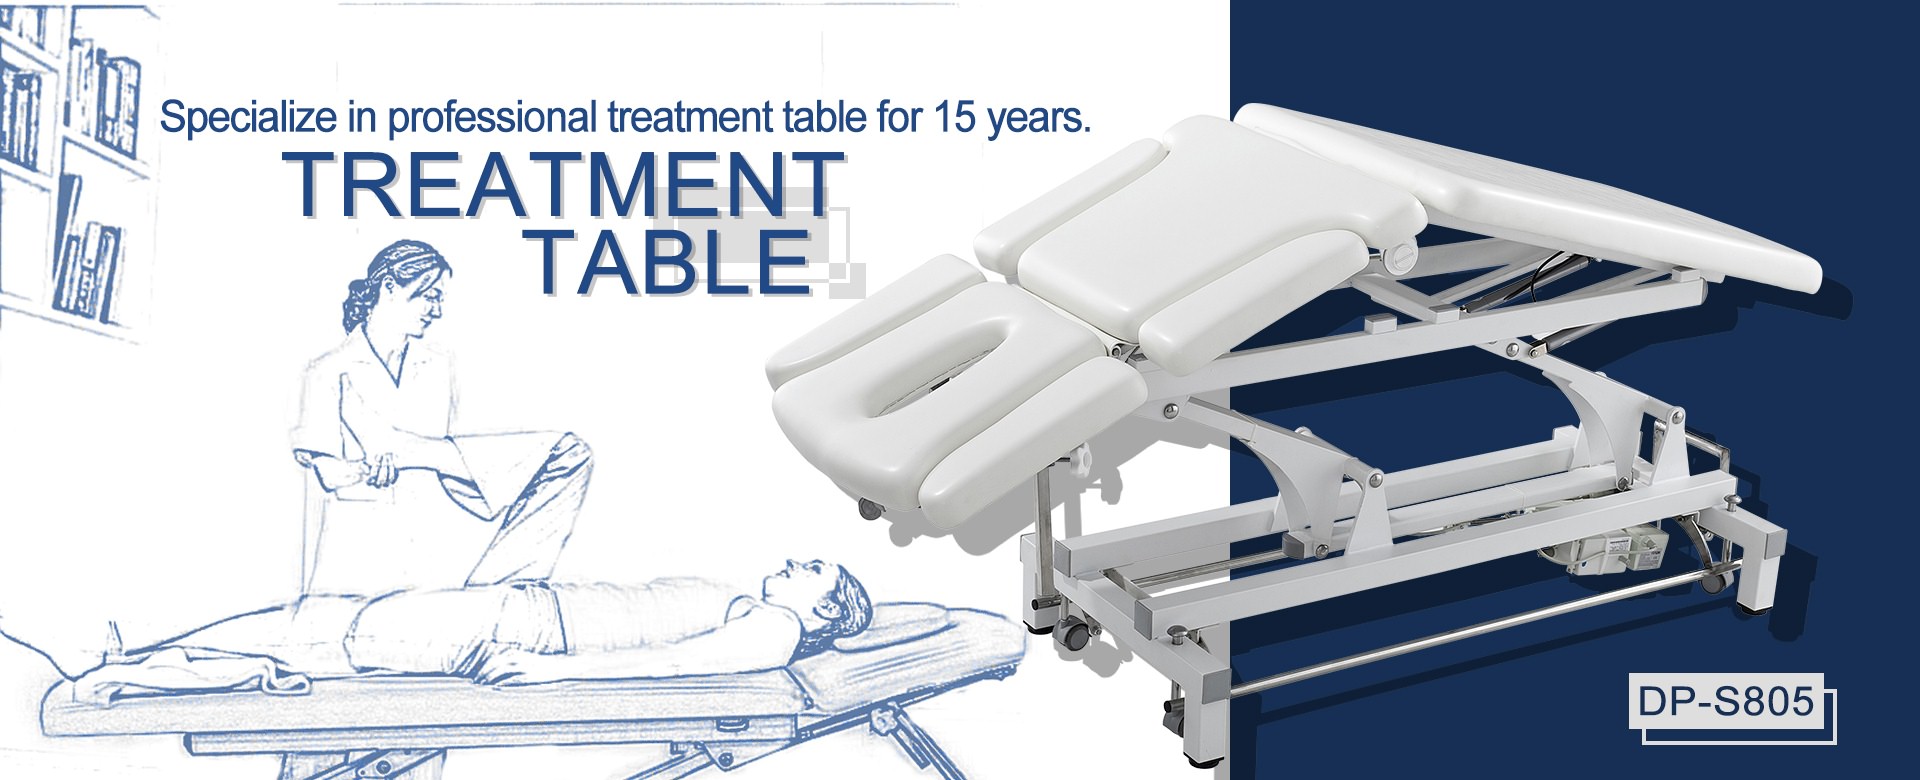 DP-S805 multifunctional treatment table is the best choice for physical therapists